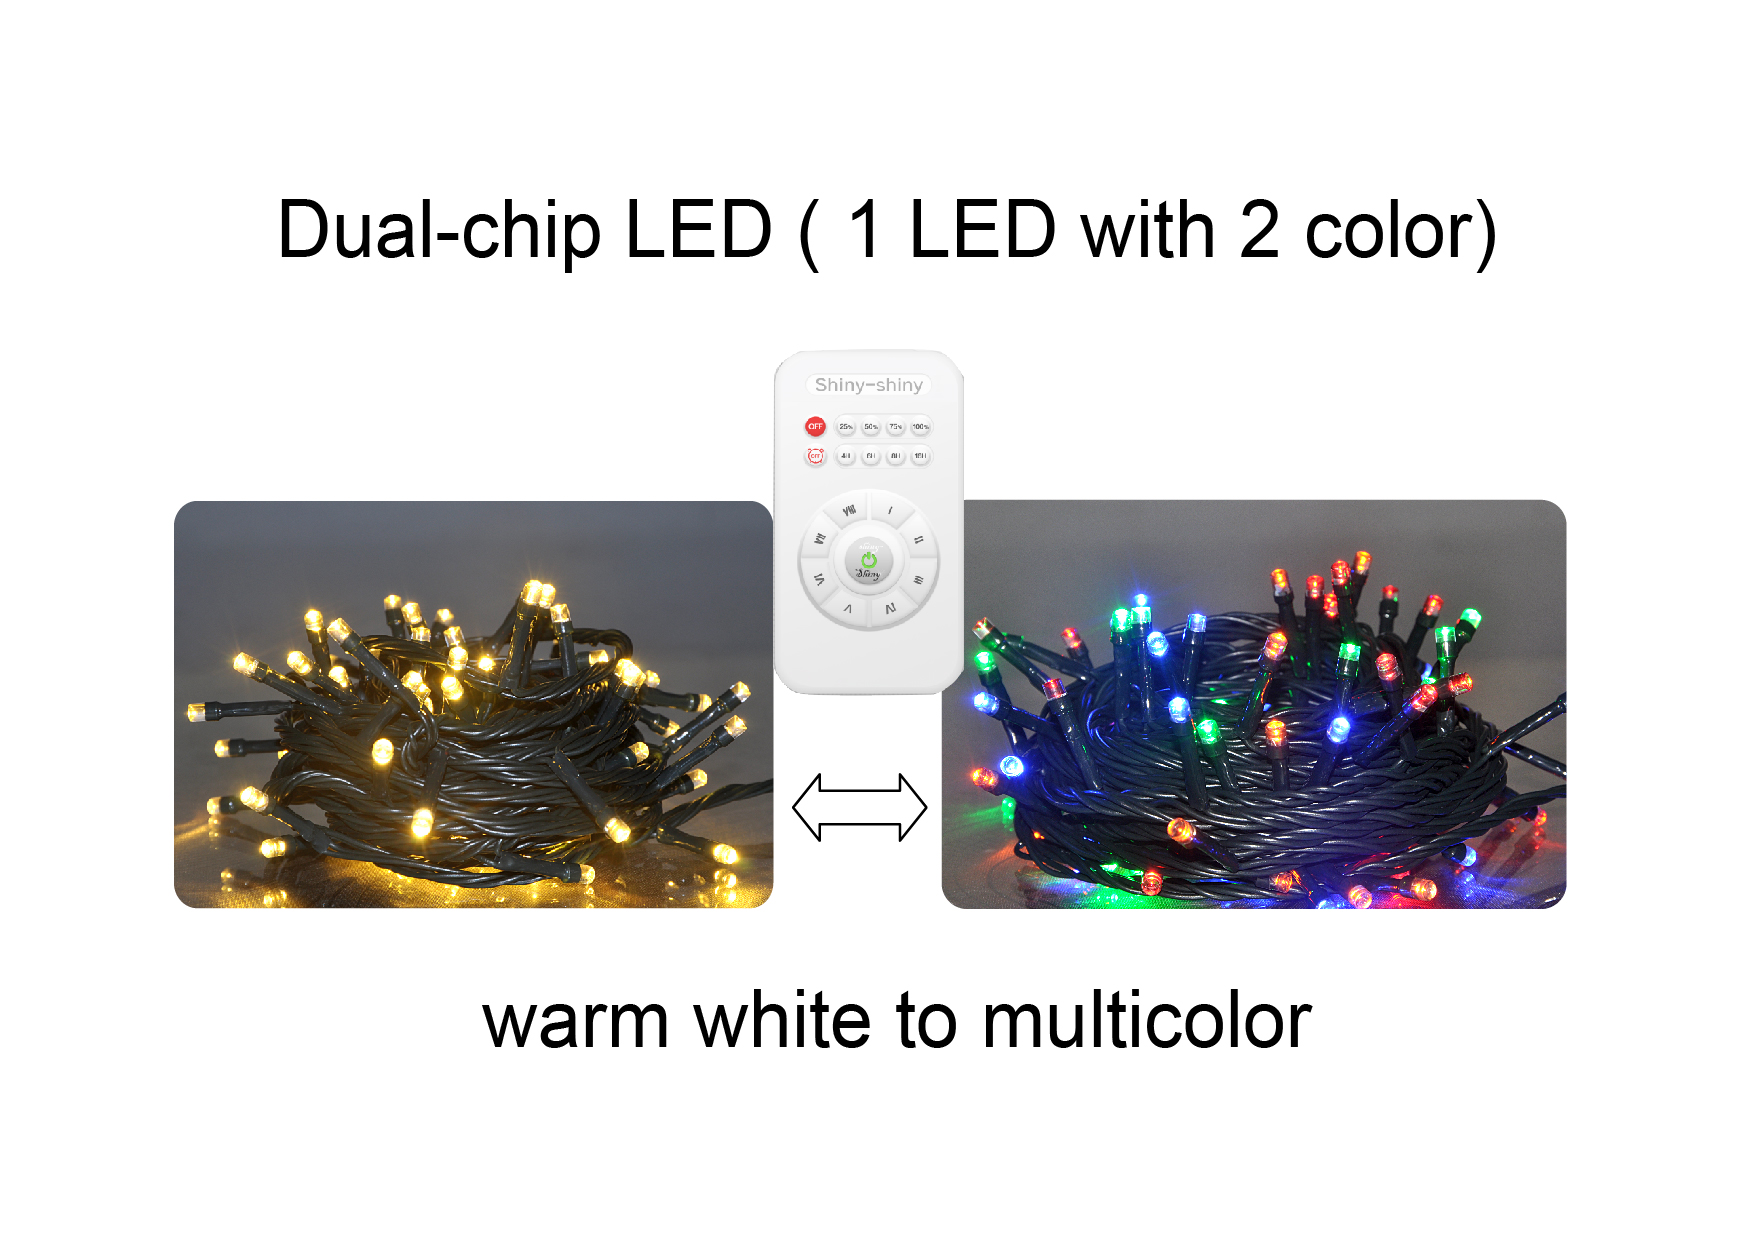 How to arrange the led light string beautifully?